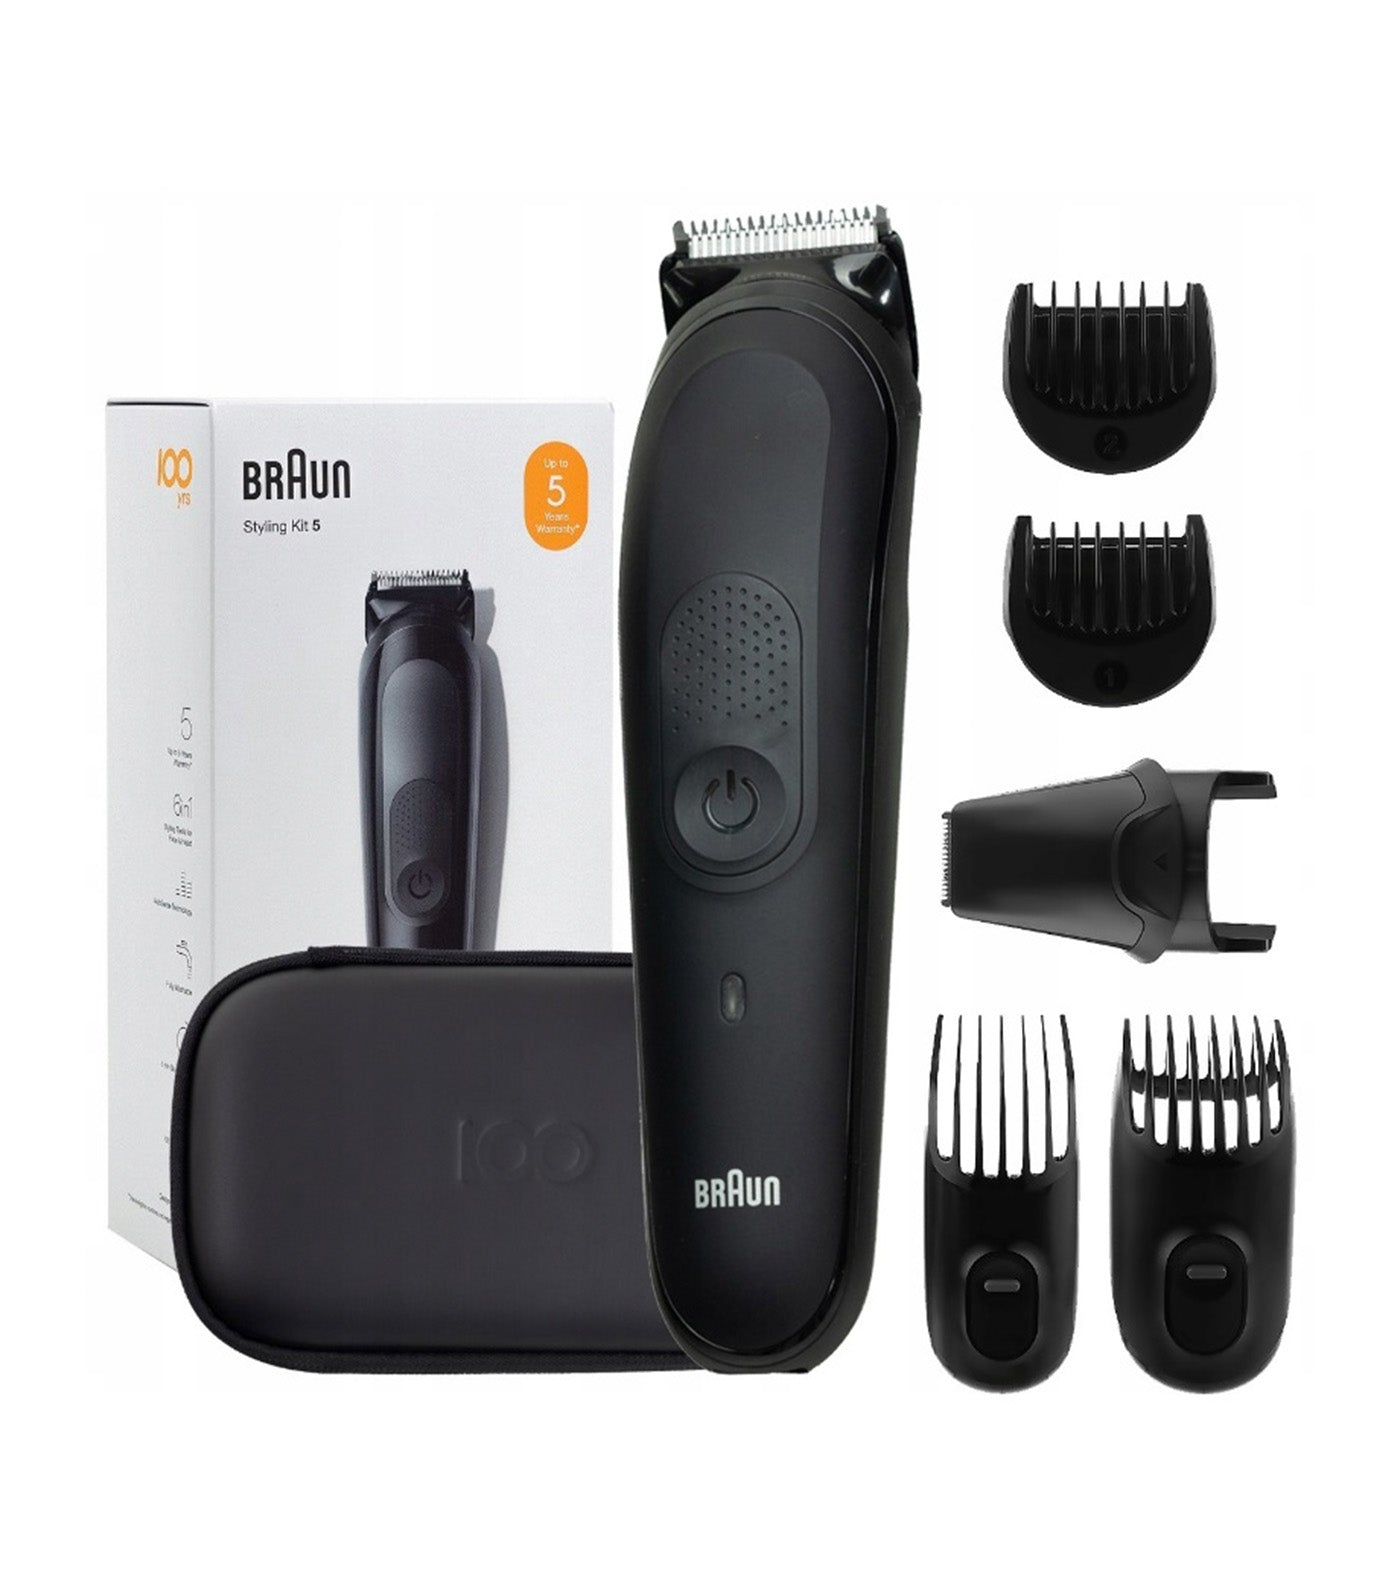 Braun 6-In-1 Styling Kit Precise Limited Case with For Styling Travel Edition Head 100 and Face Years Black